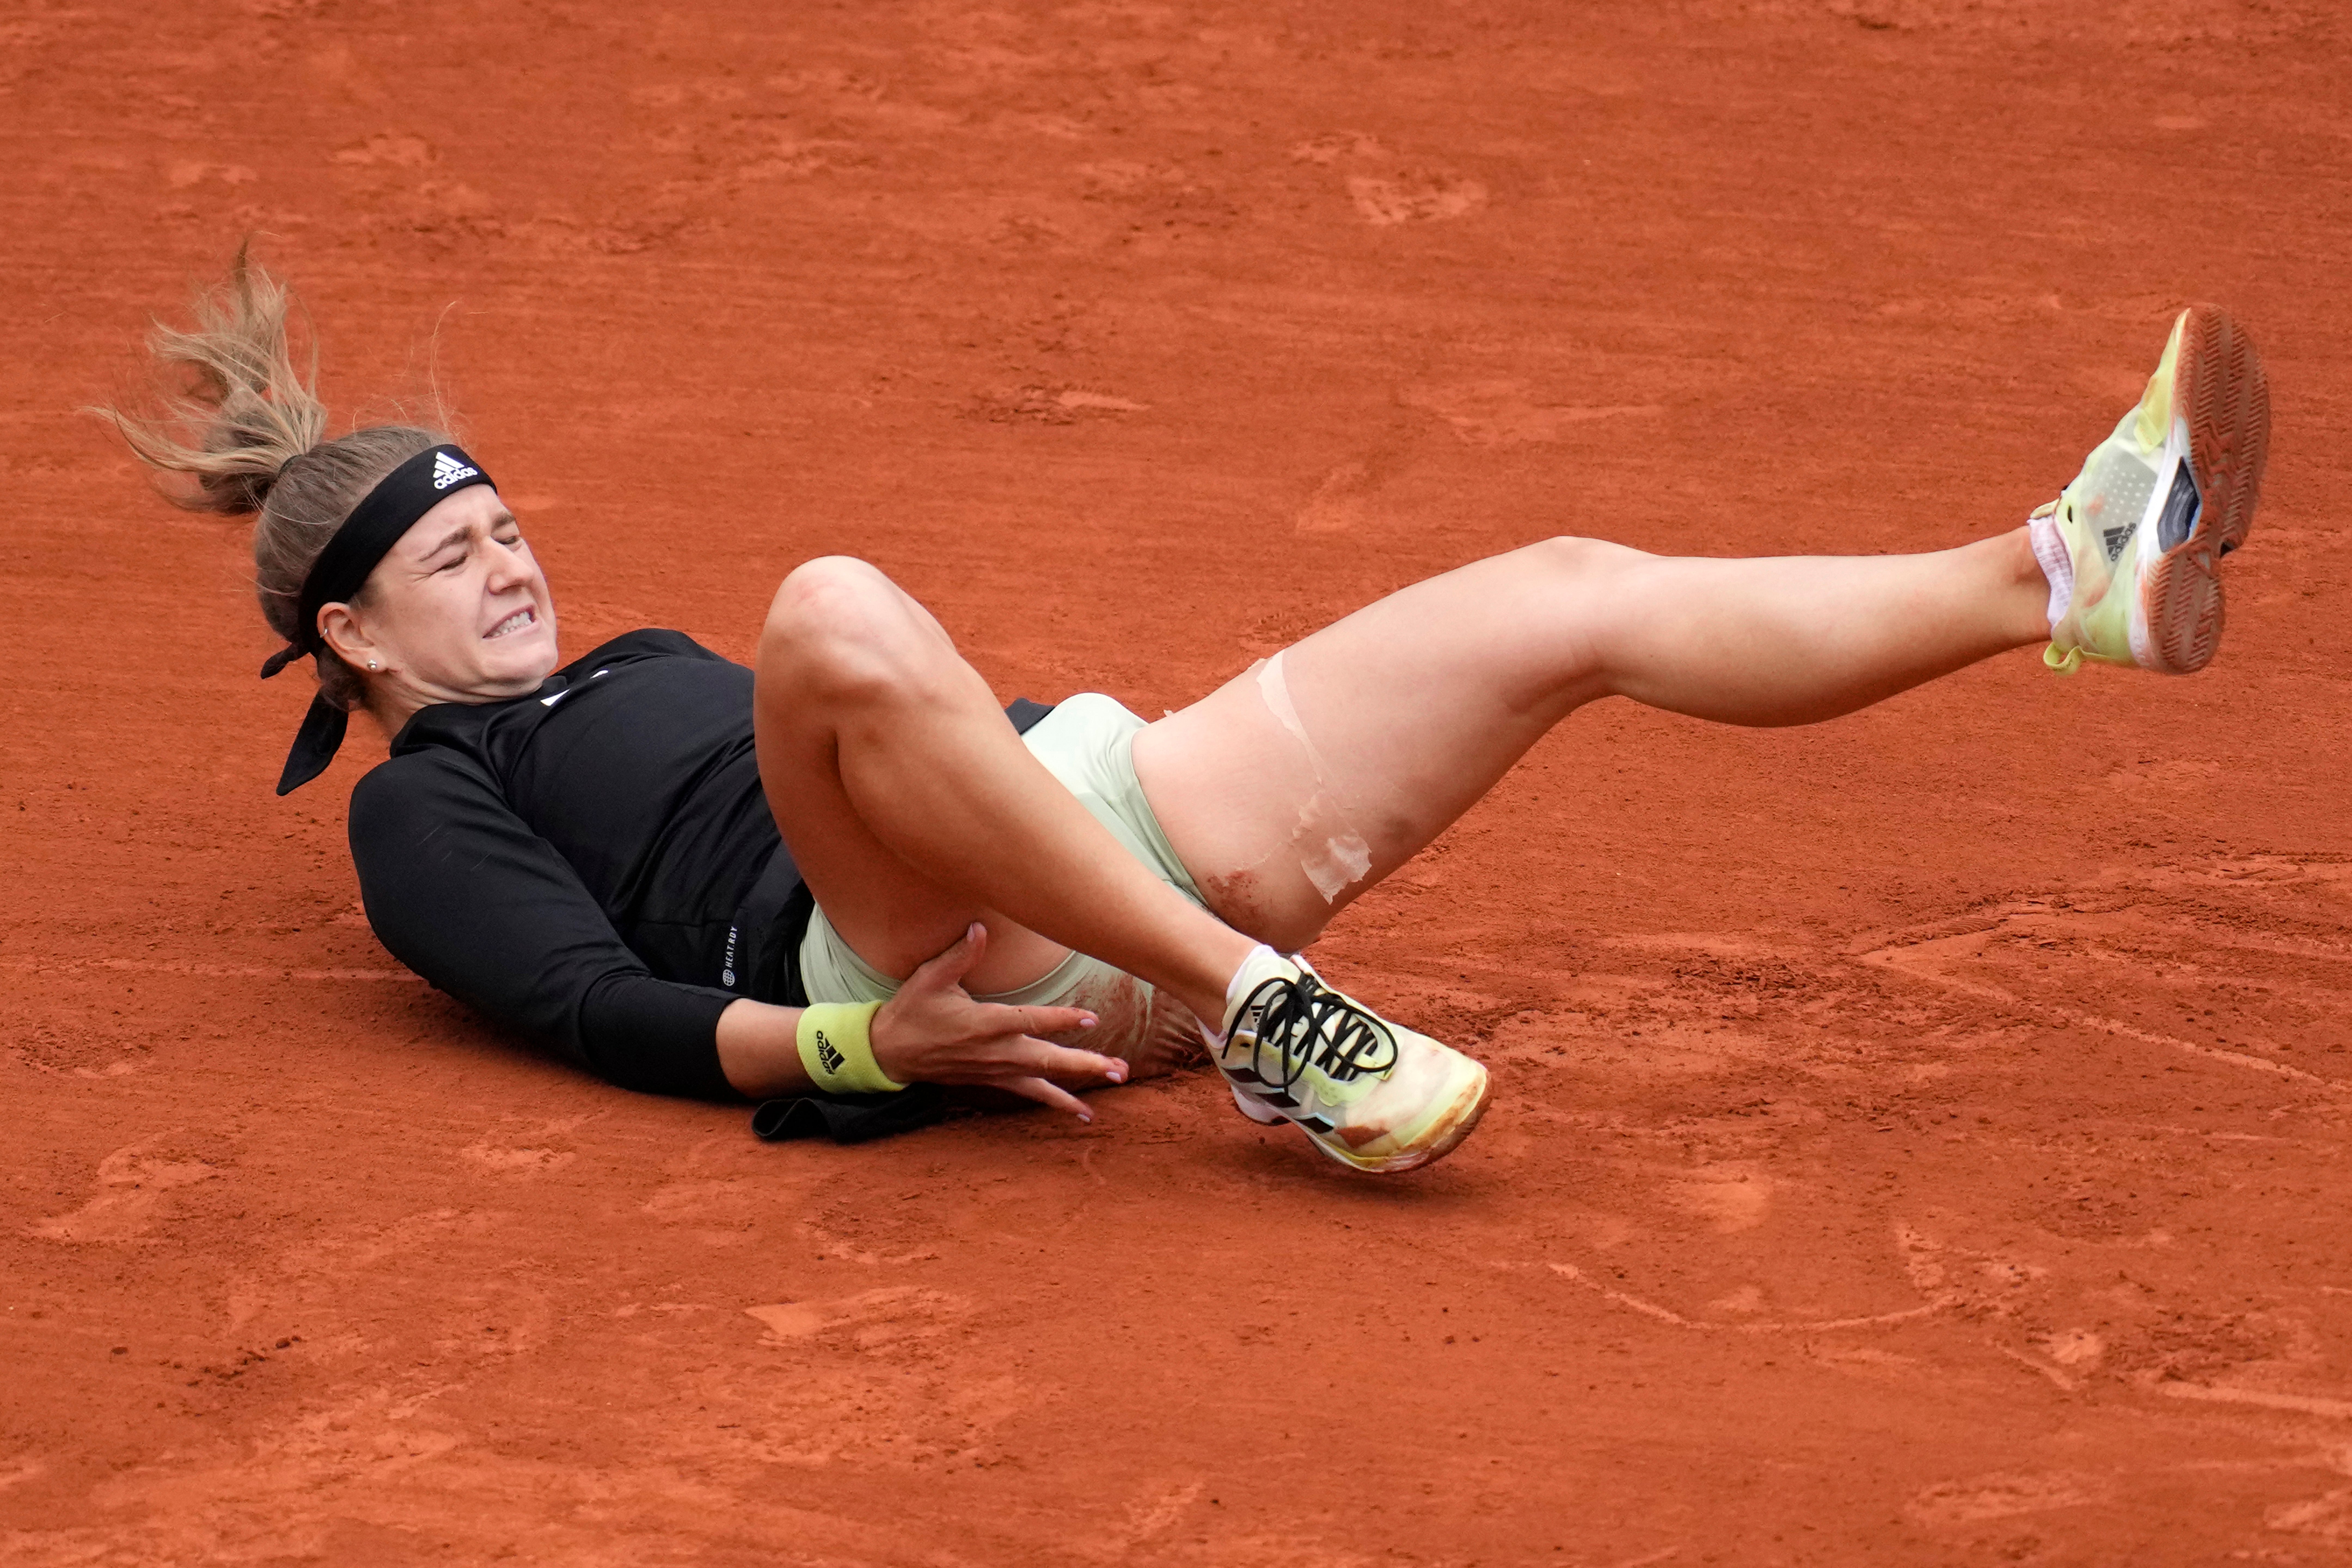 Karolina Muchova had to retire after twisting her ankle (Christophe Ena/AP)